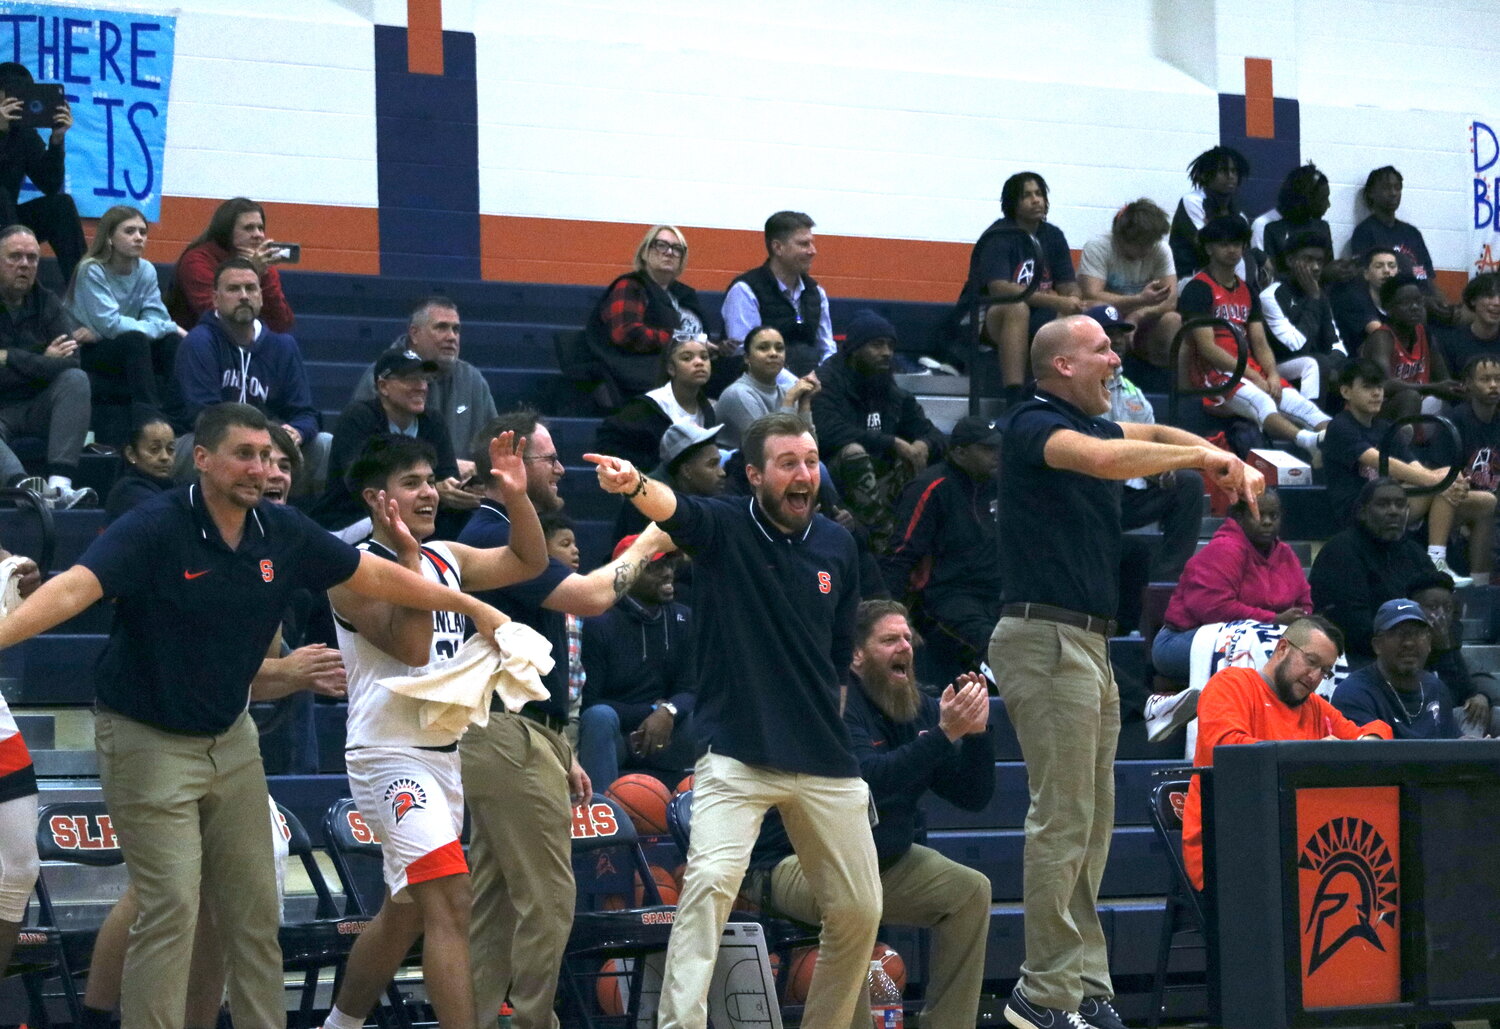 Seven Lakes coaches celebrate after a dunk by Brett Norton during Monday's game between Seven Lakes and Pearland Dawson at the Seven Lakes gym.